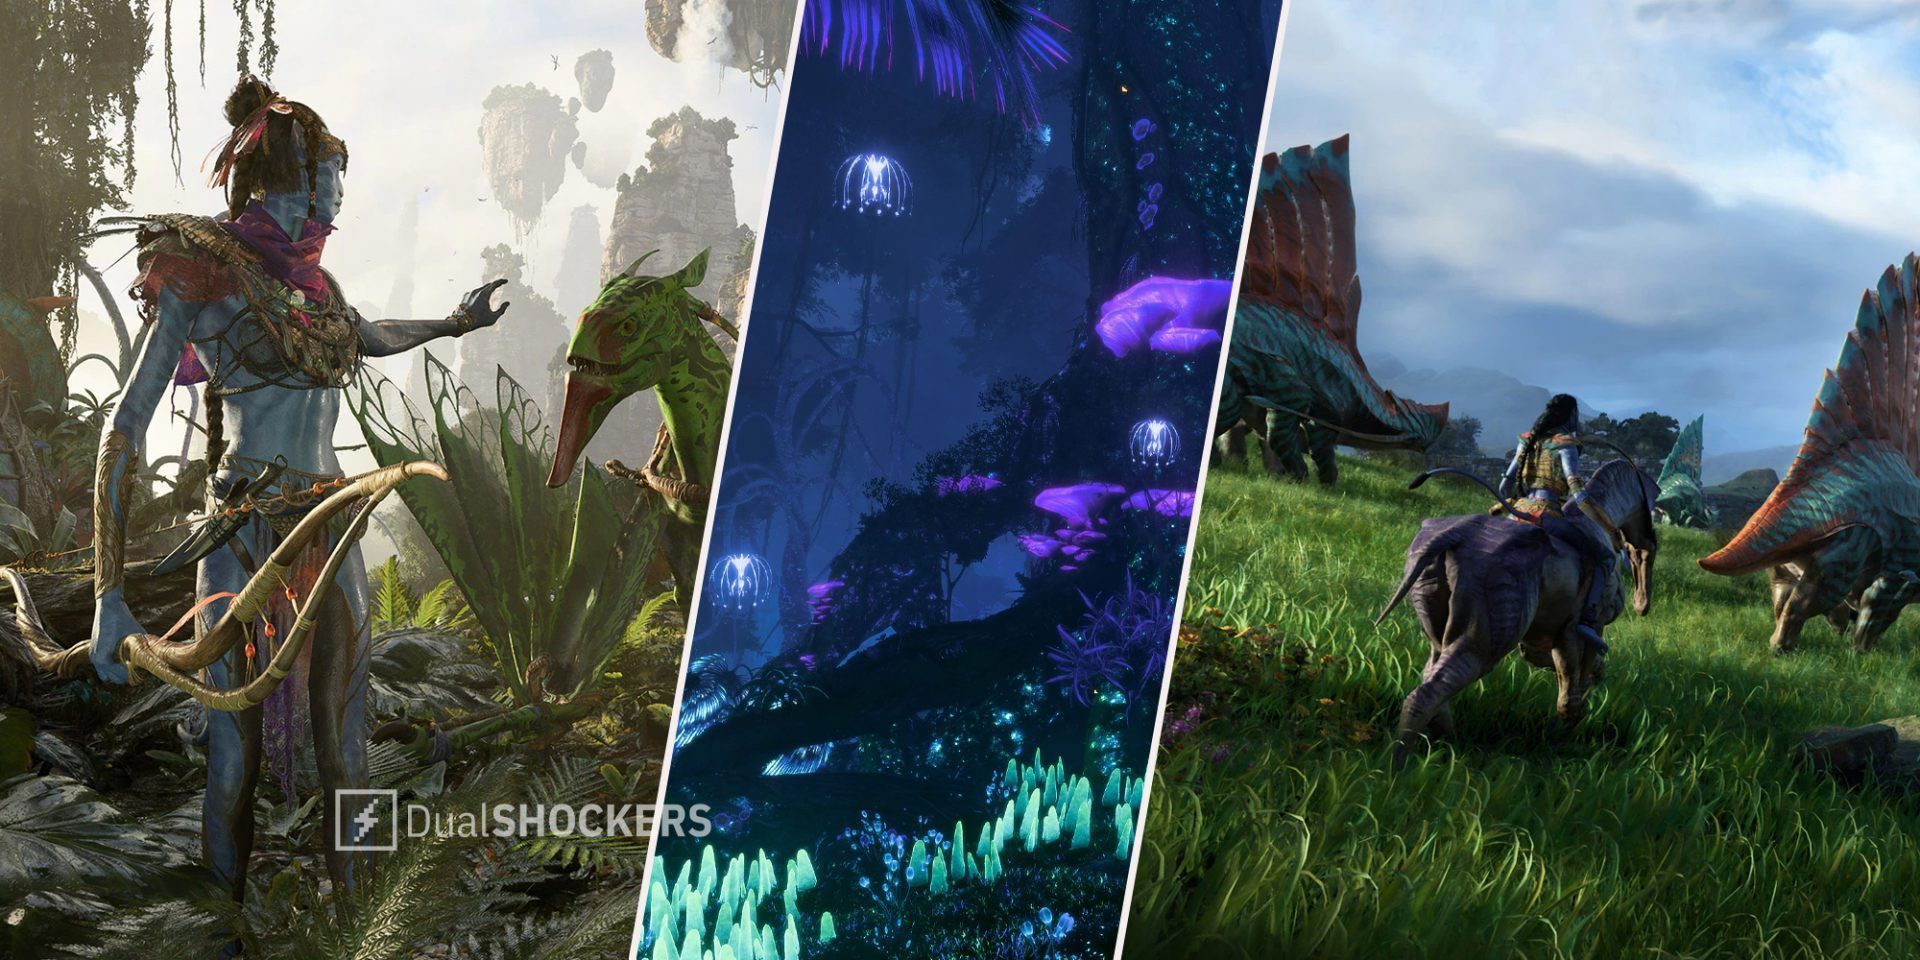 Avatar: Frontiers of Pandora promo image on left, Avatar: Frontiers of Pandora scenery in middle, Avatar: Frontiers of Pandora promo image character riding creature on right